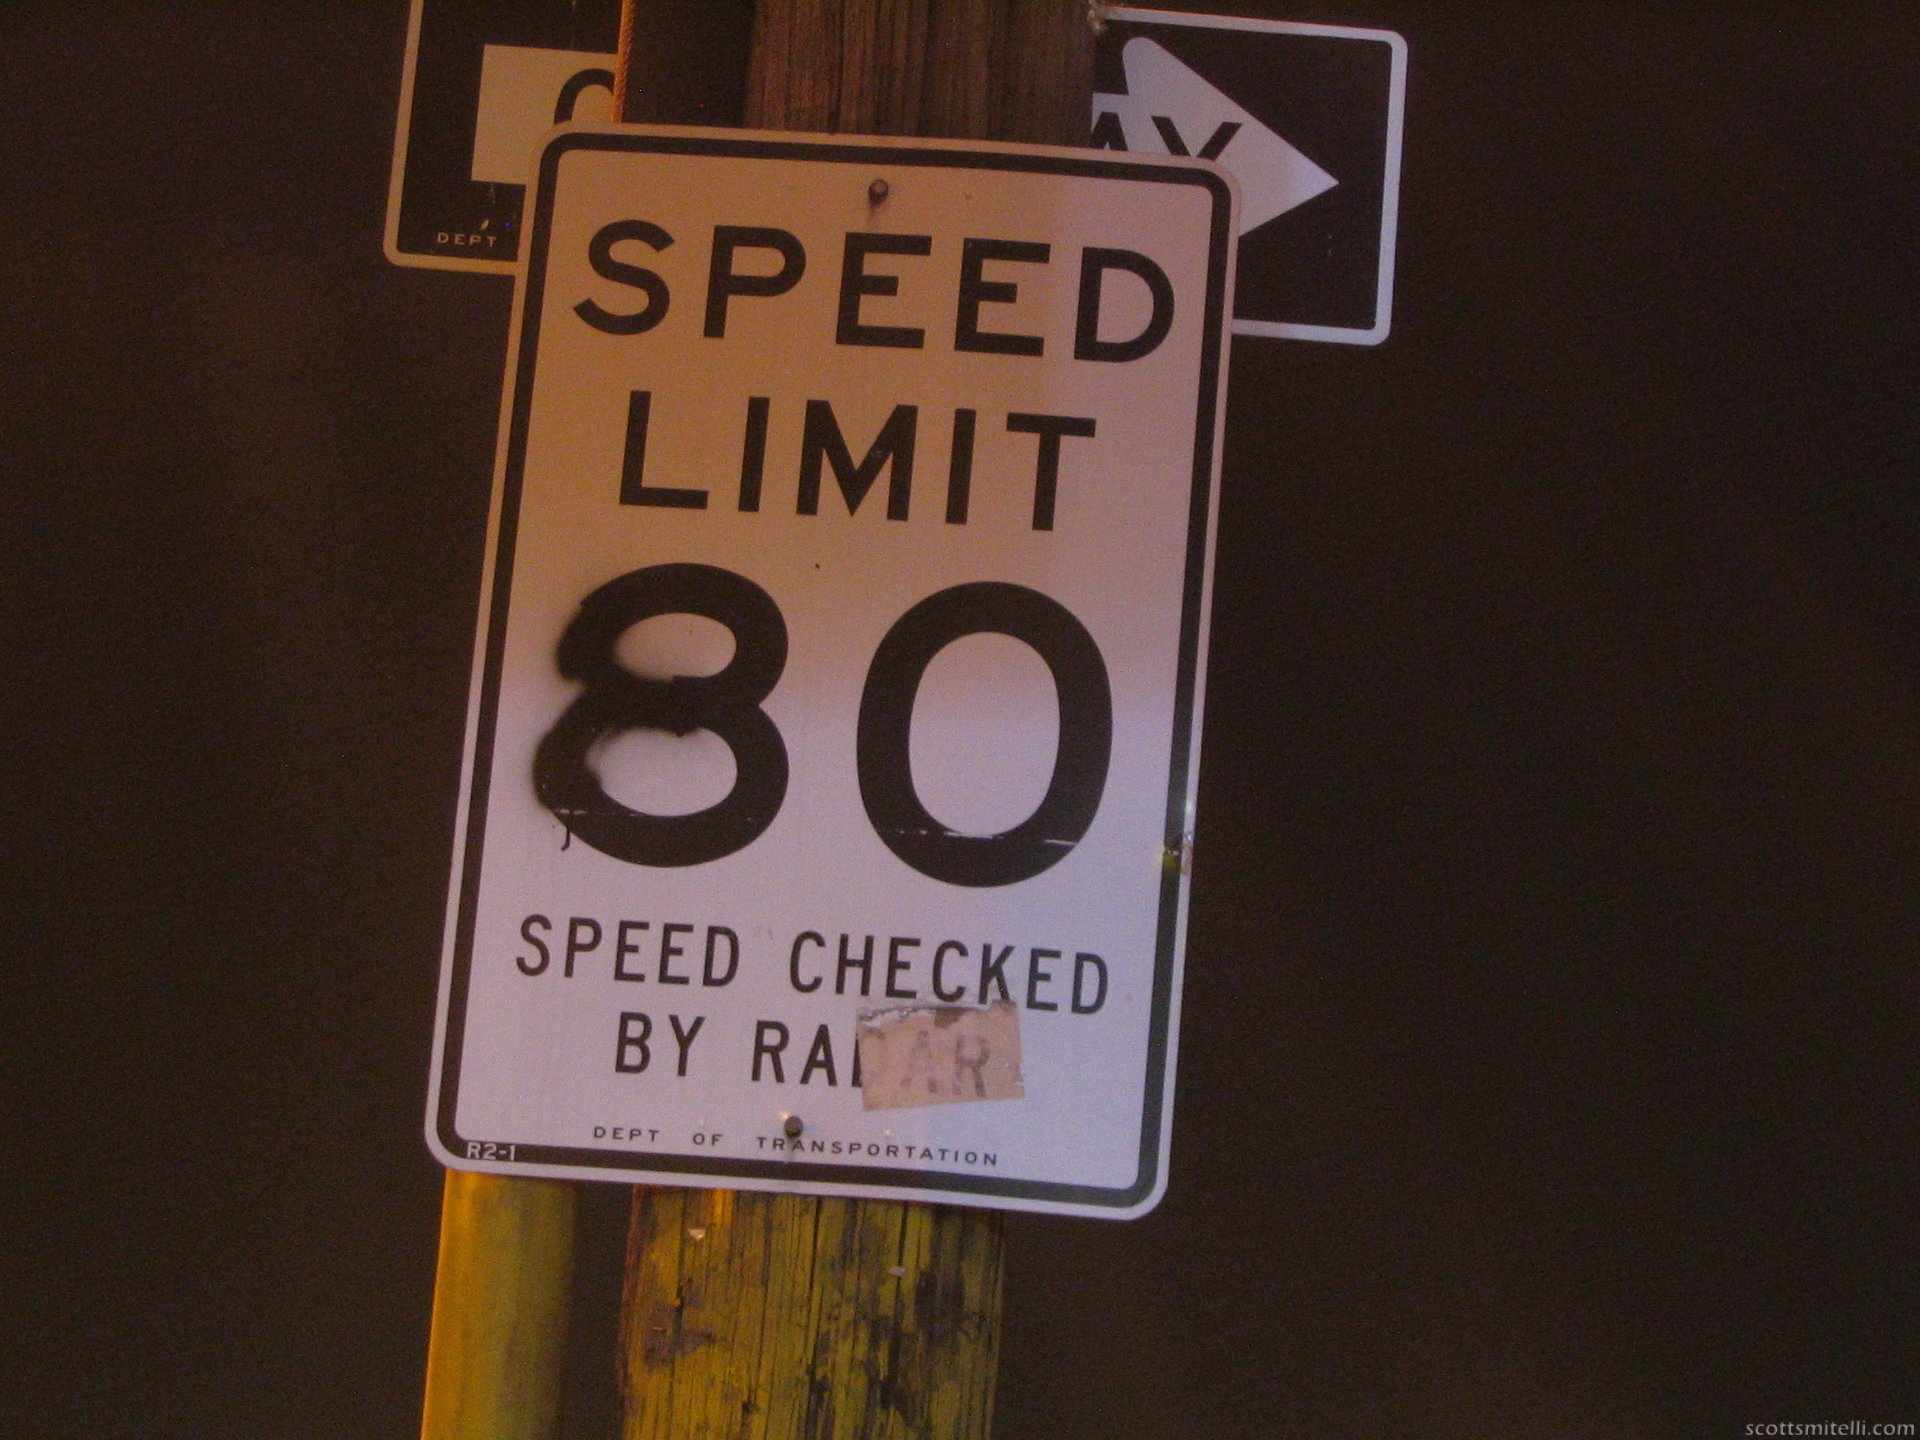 80. Speed checked by R.A. (or Ra)